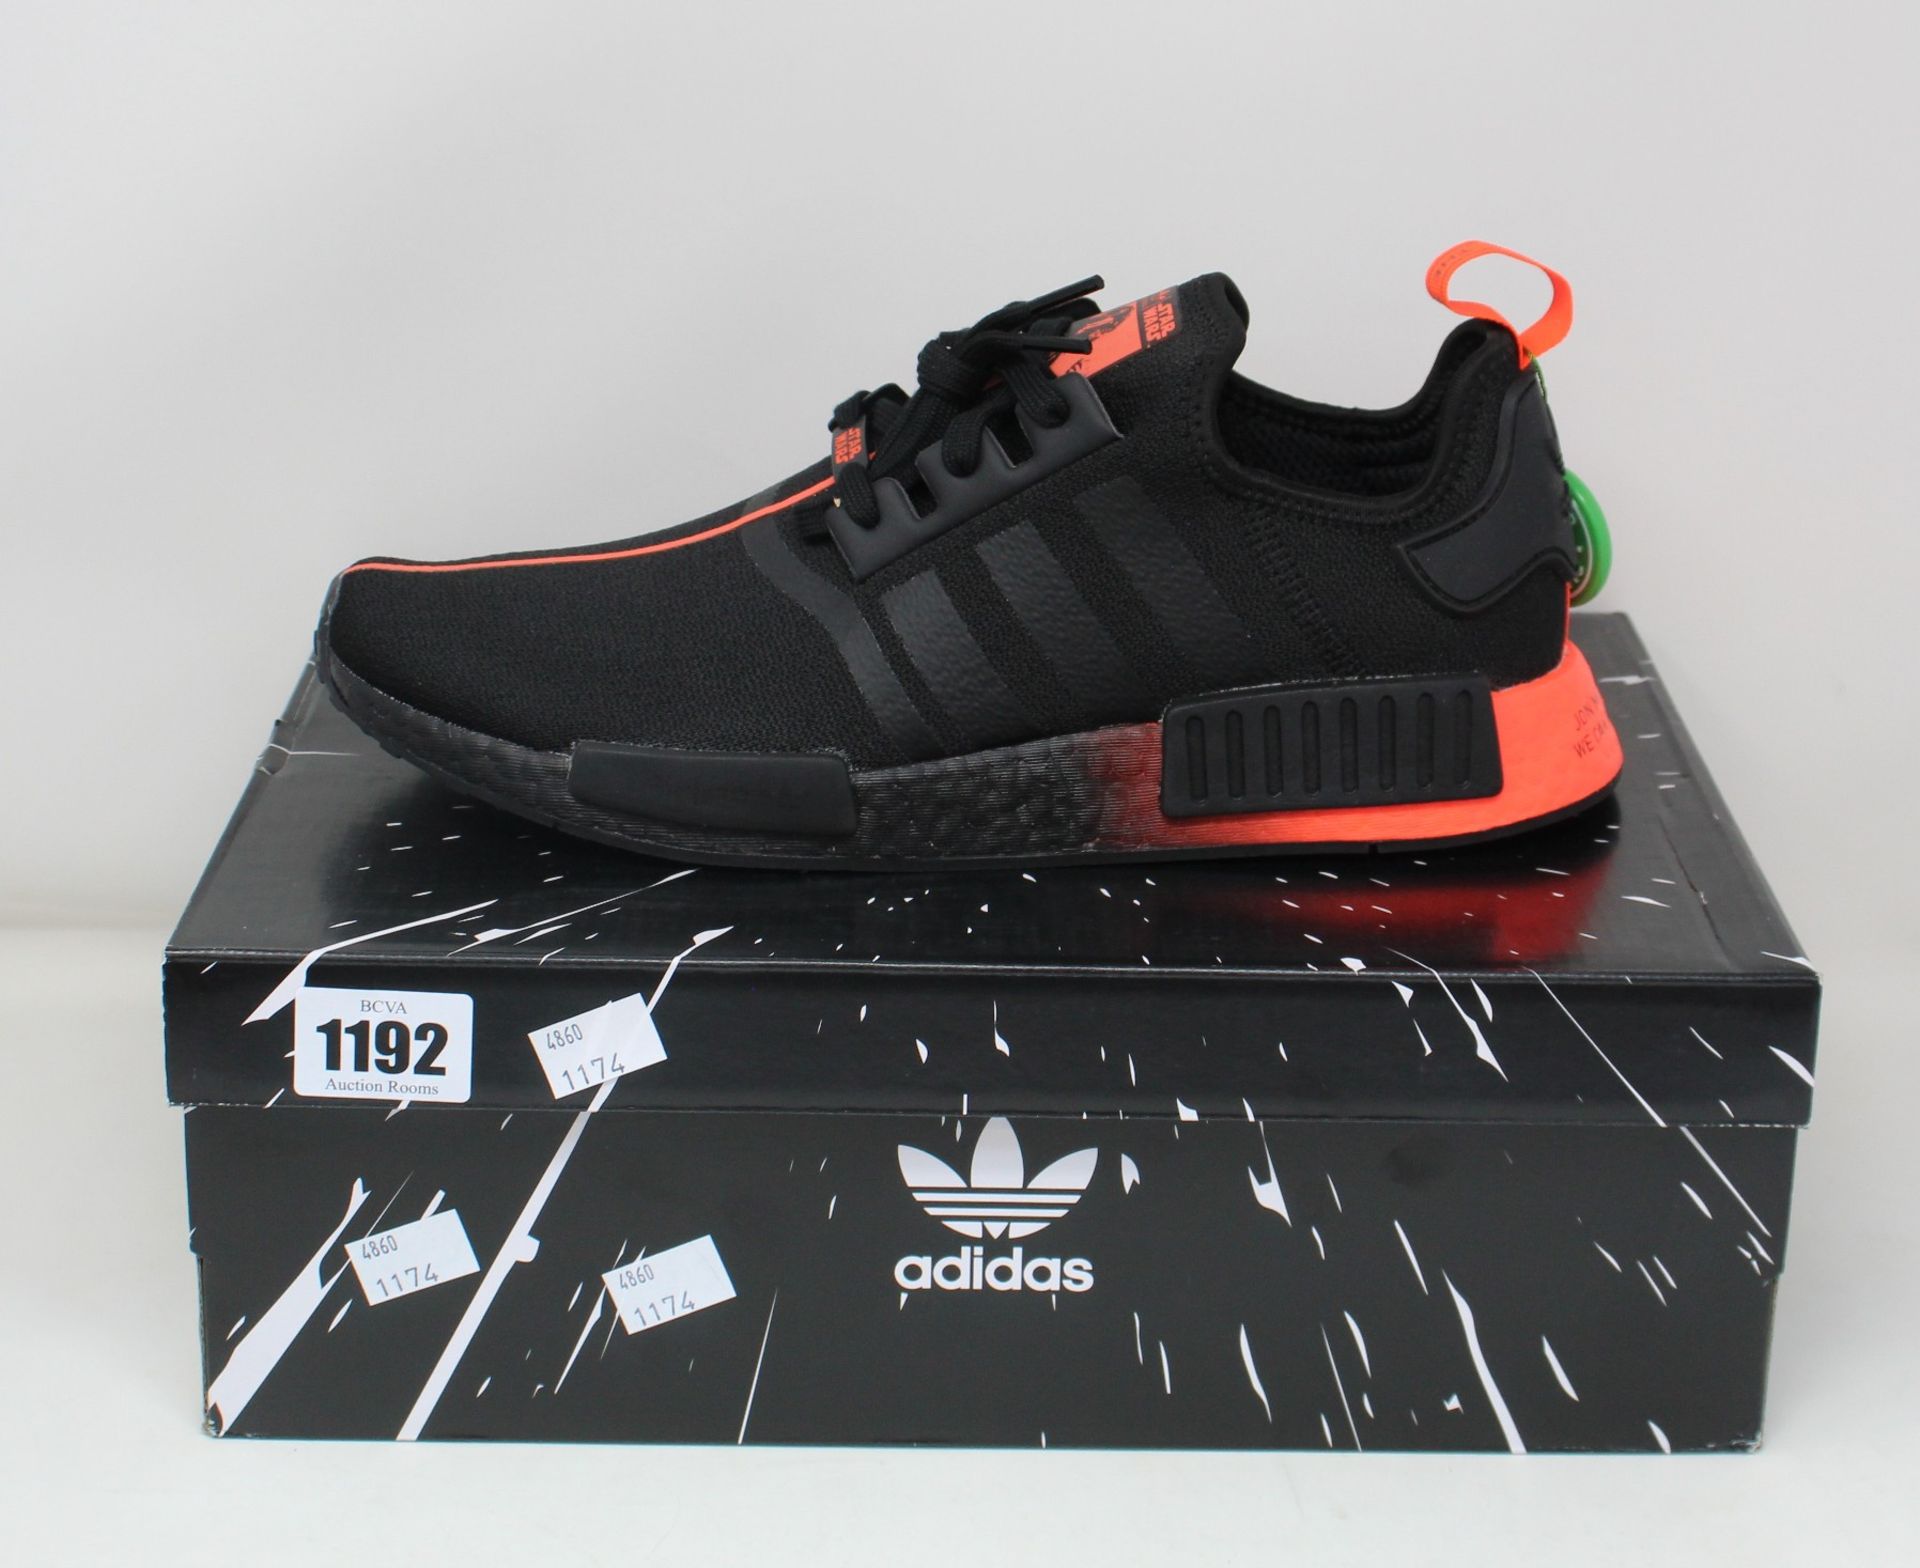 A pair of as new Adidas NMD-R1-Star Wars Darth Vader trainers (UK 11.5).